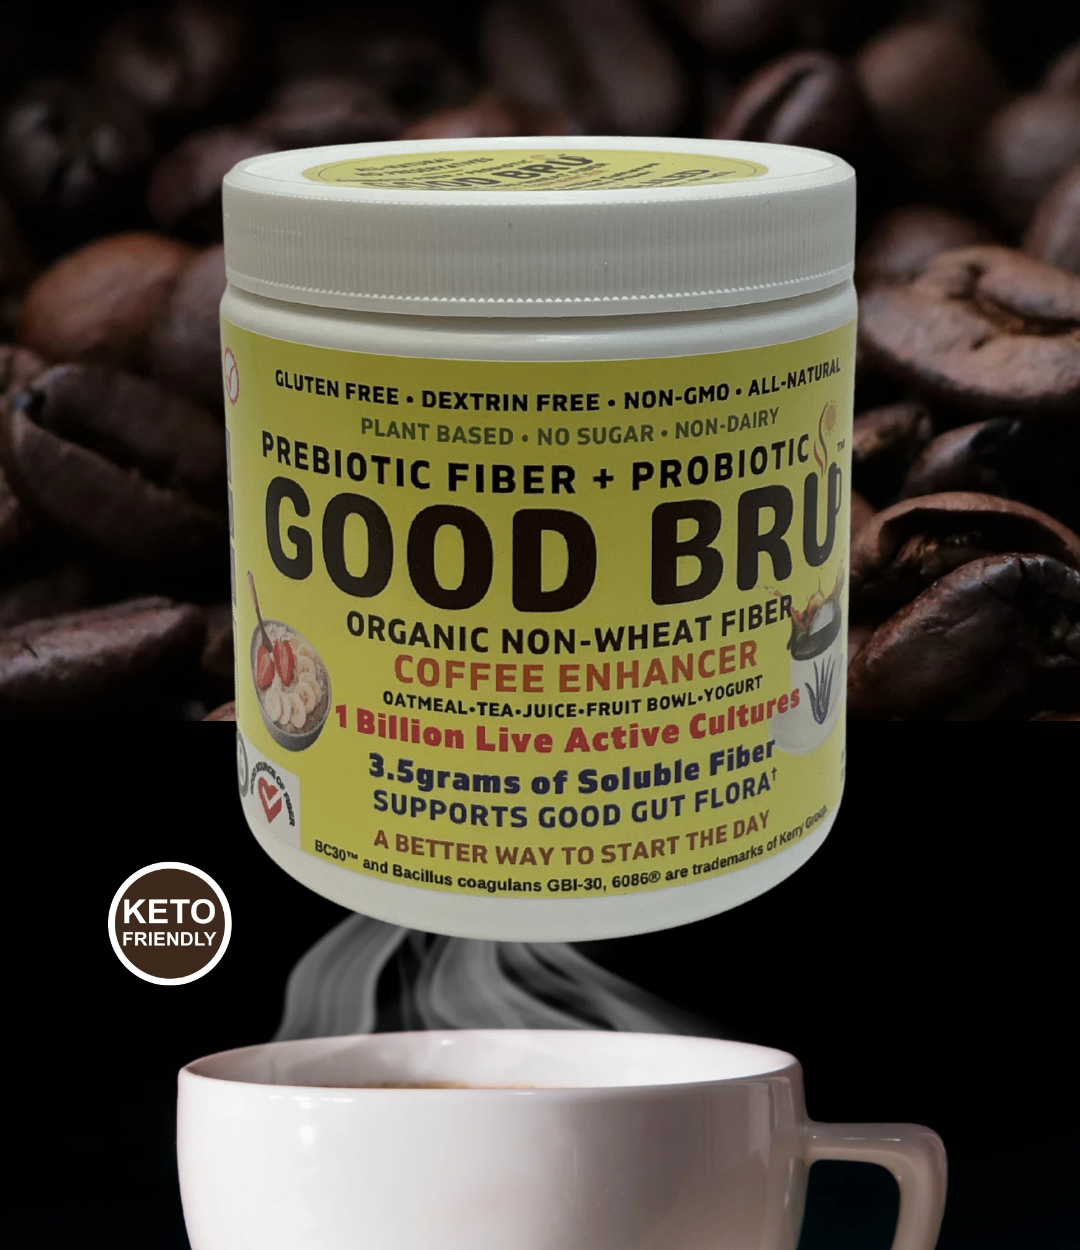 Good Bru organic prebiotic soluble fiber plus 1 billion live active cultures of bacillus coagulans probiotic.  It can go in your coffee.  Say goodbye to an angry gut.  Rebuilding your gut can fight GERD, acid reflux, IBS, IBD and leaky gut.  Probiotics in Good Bru are backed by research to support faster recovery from workouts, build muscle, support immune function and Good Bru is a good source of fiber! What are you waiting for? Give Good Bru a try.